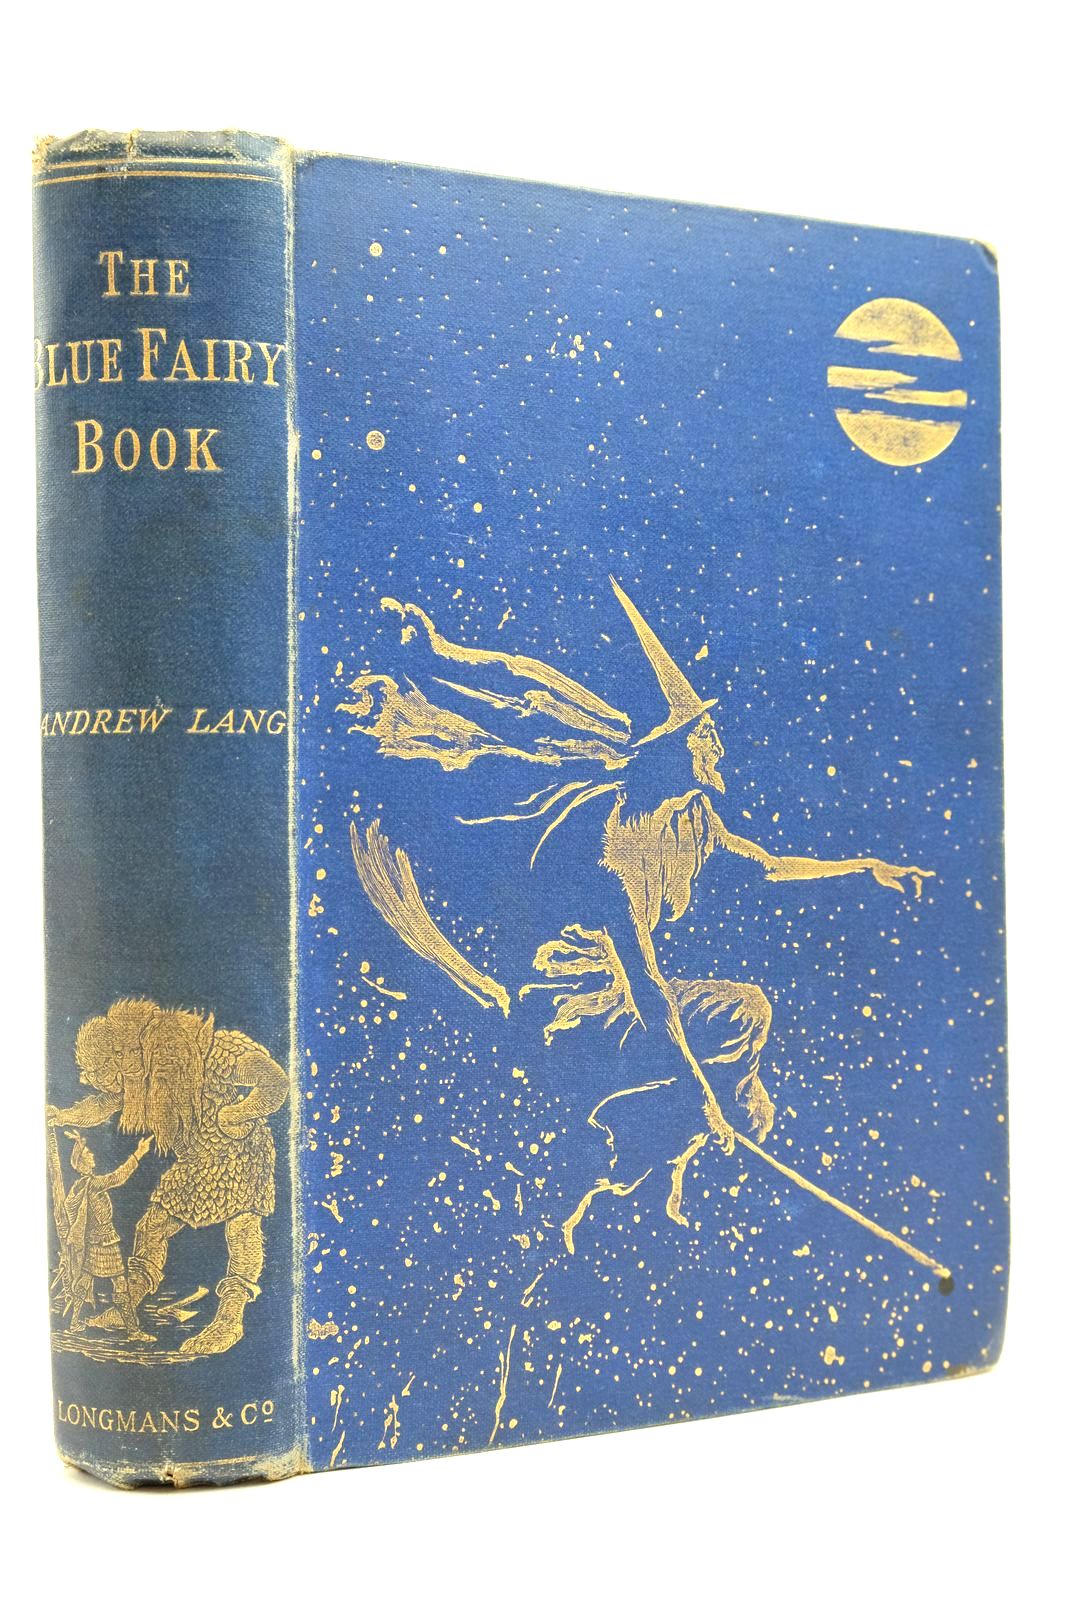 Photo of THE BLUE FAIRY BOOK written by Lang, Andrew illustrated by Ford, H.J. published by Longmans, Green & Co. (STOCK CODE: 2139762)  for sale by Stella & Rose's Books